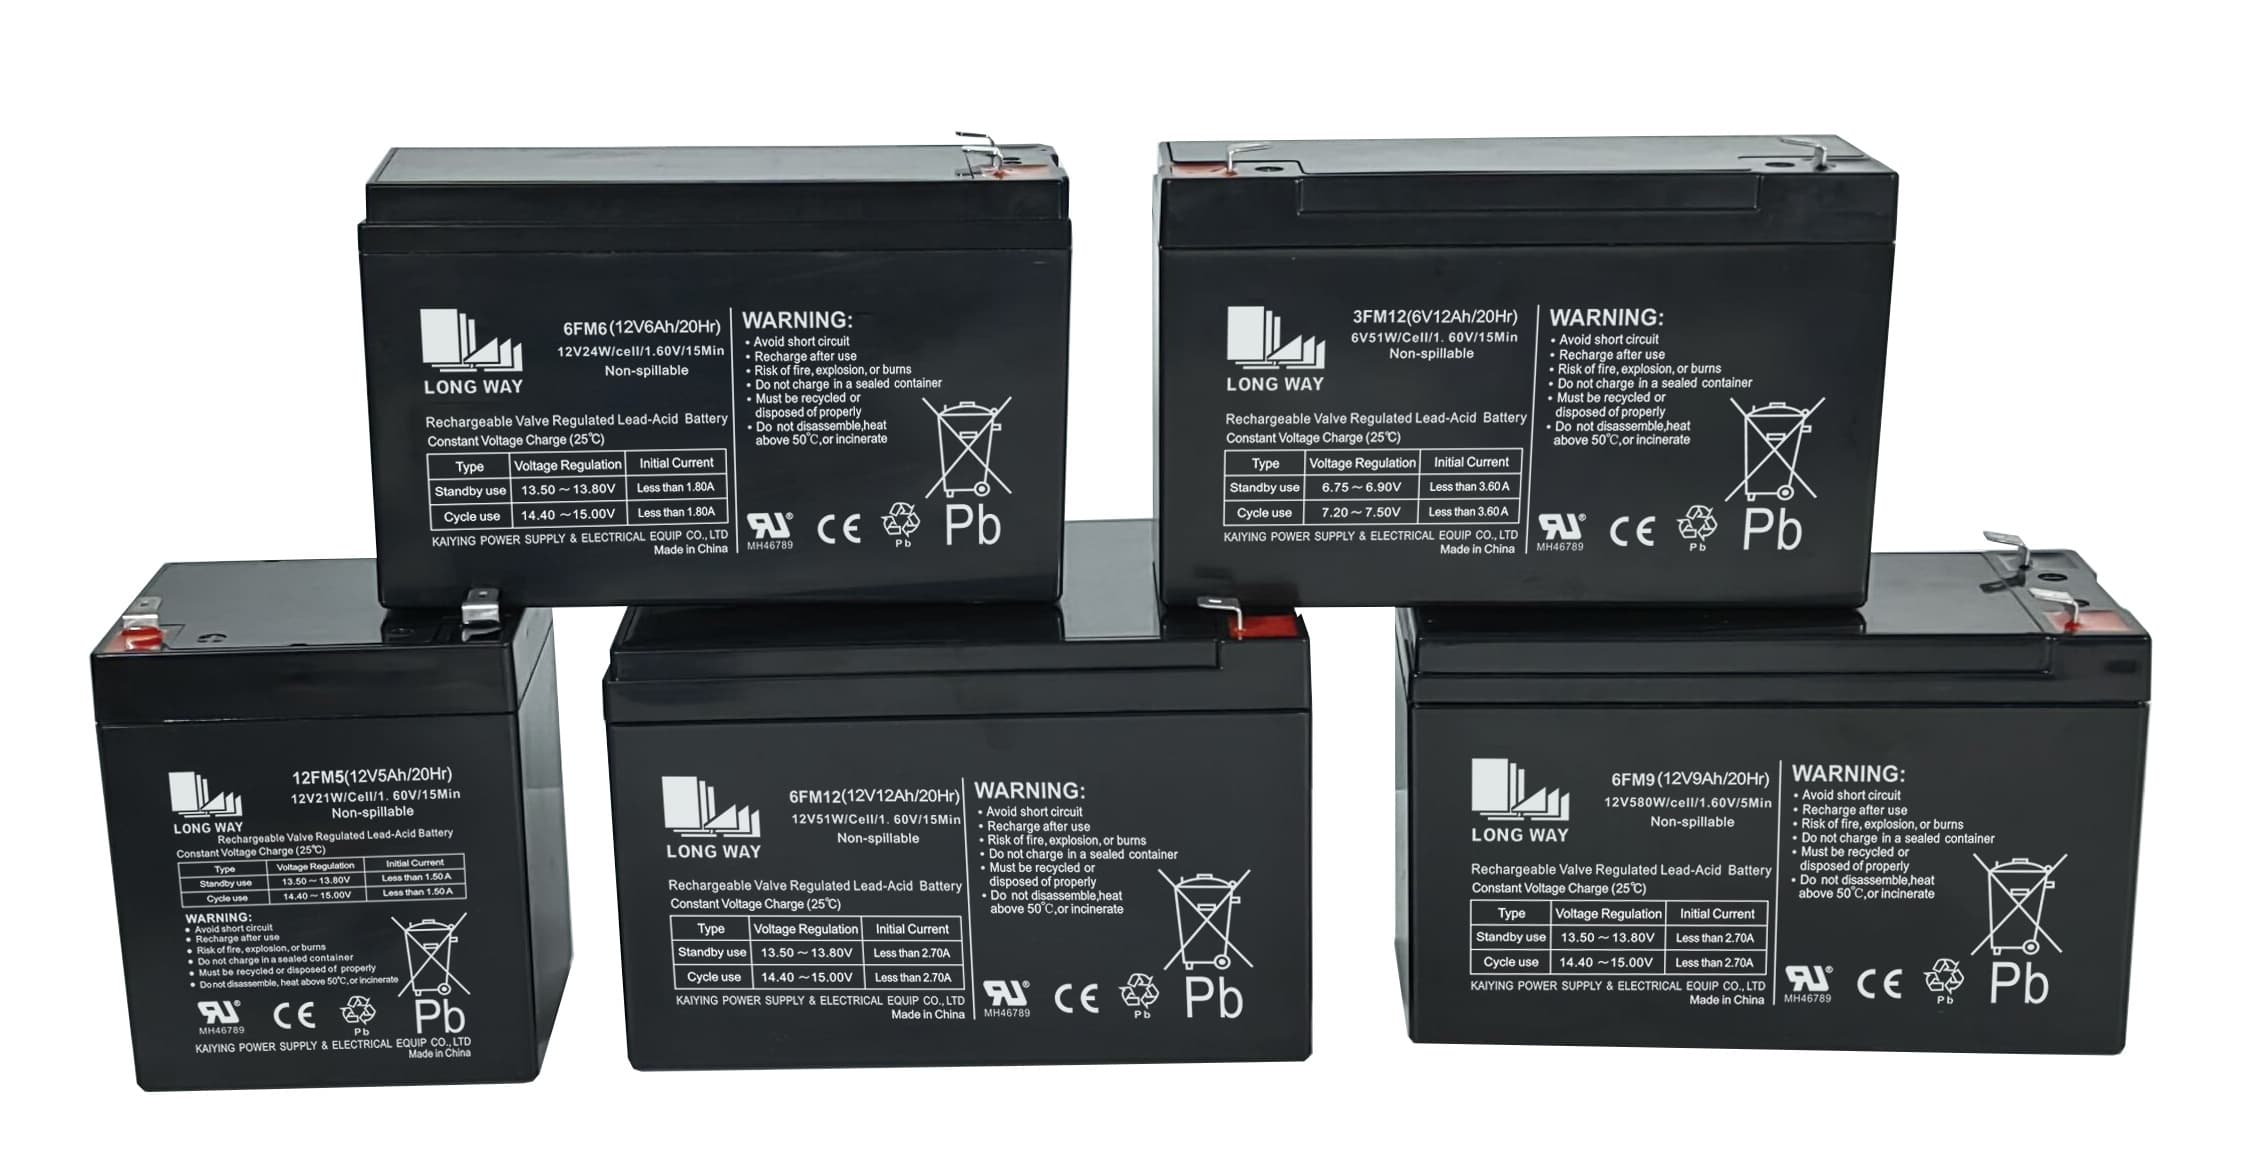 LongWay 6FM6 12V 6Ah Battery with F1 Terminals